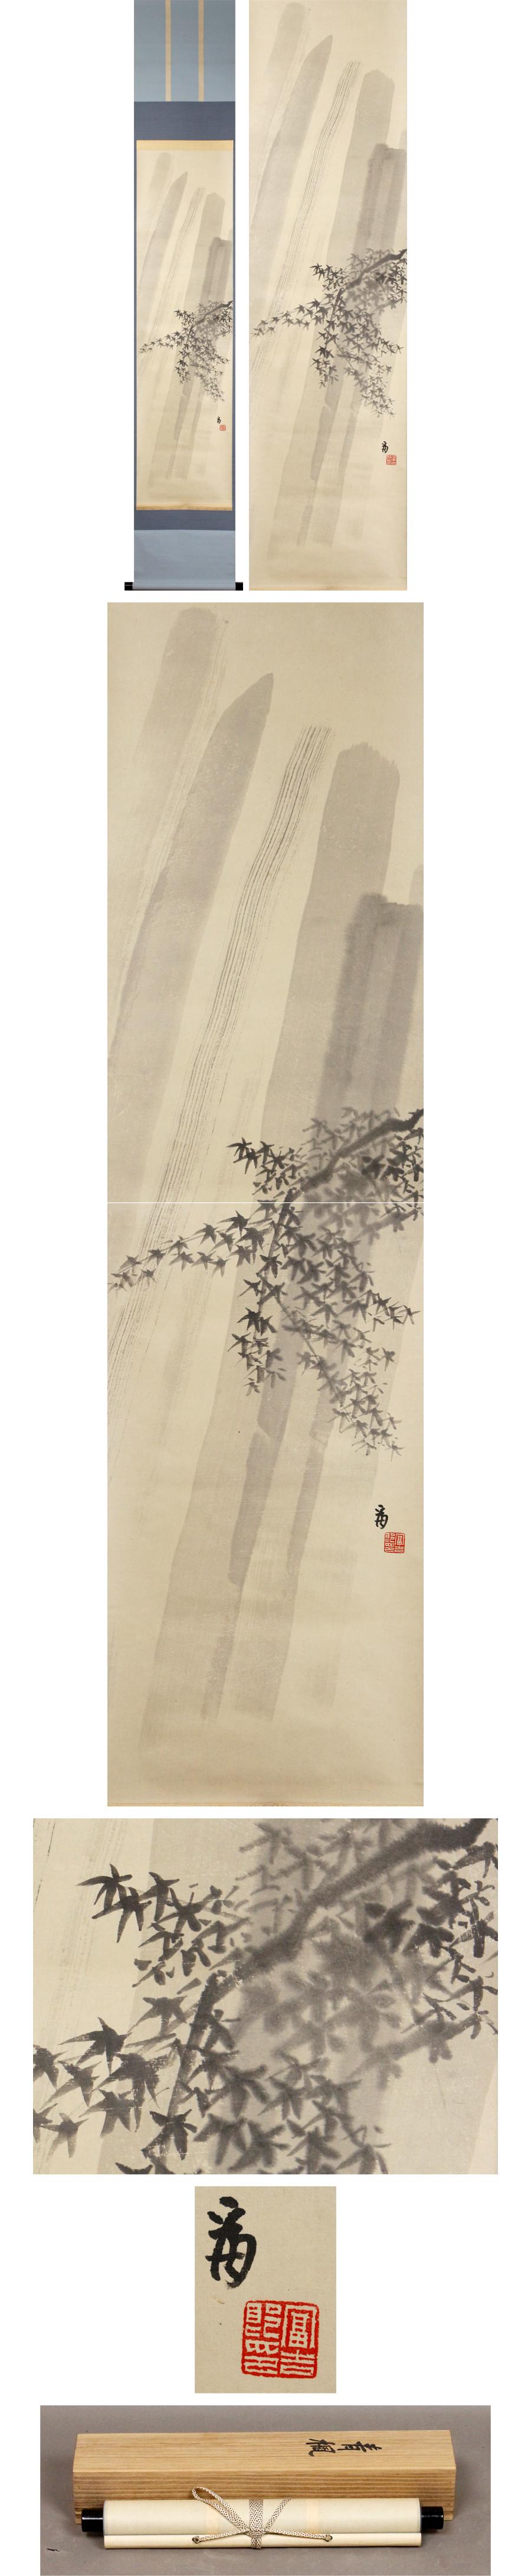 Has been is the work produced by Tokuriki Tomiyoshiro known as woodblock artist, such as you can see.
It is a work that makes you feel a unique calmness and taste, is very attractive work.

